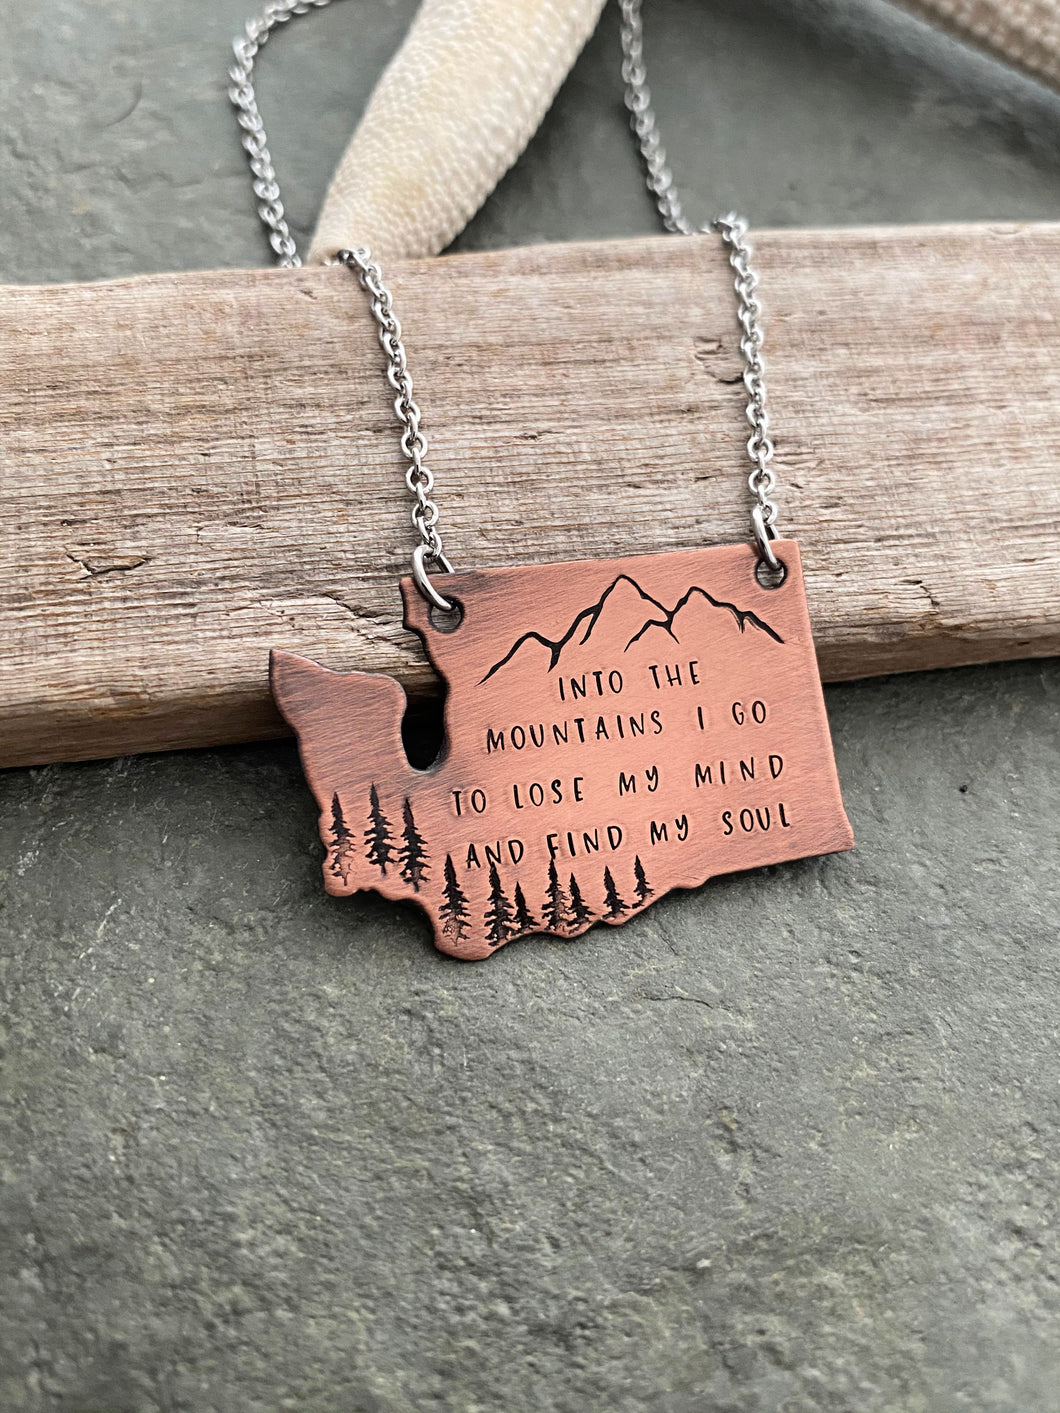 Into the mountains I go to lose my mind and find my soul - Washington State Necklace - Mountains and Trees with Quote